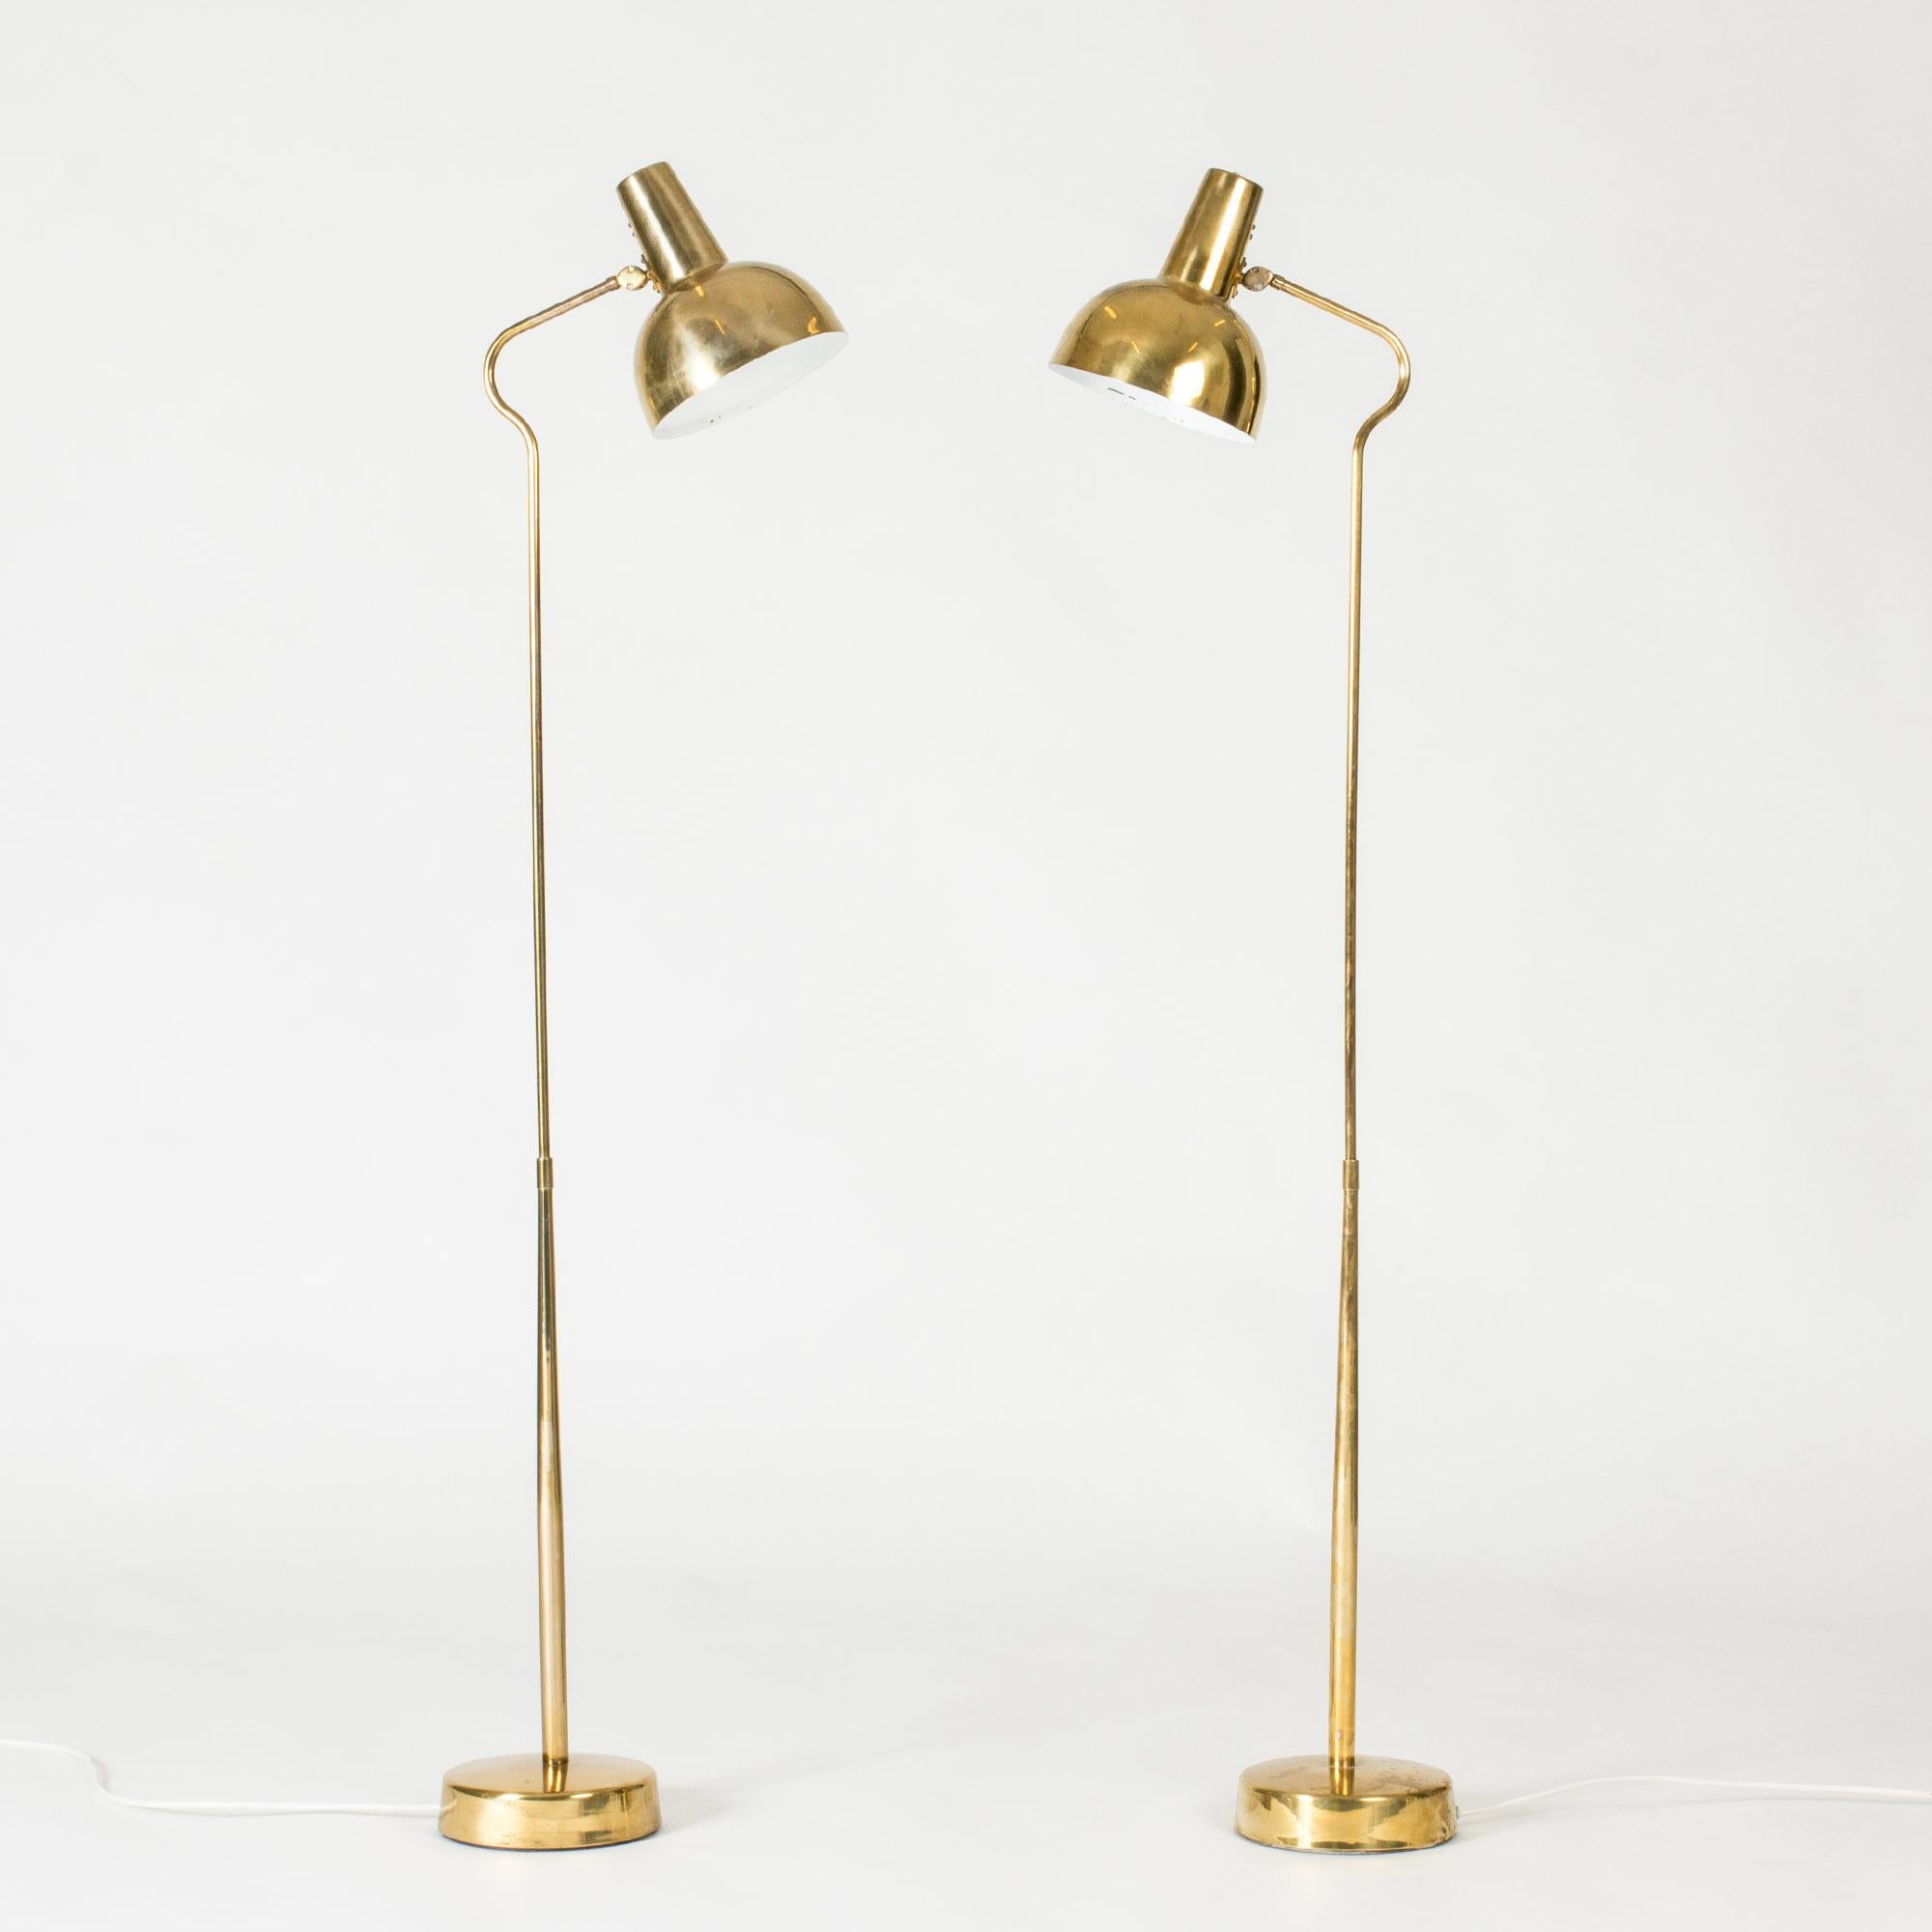 Pair of elegant brass floor lamps from ASEA in a sleek design with elegant curves. Warm glow of the brass.